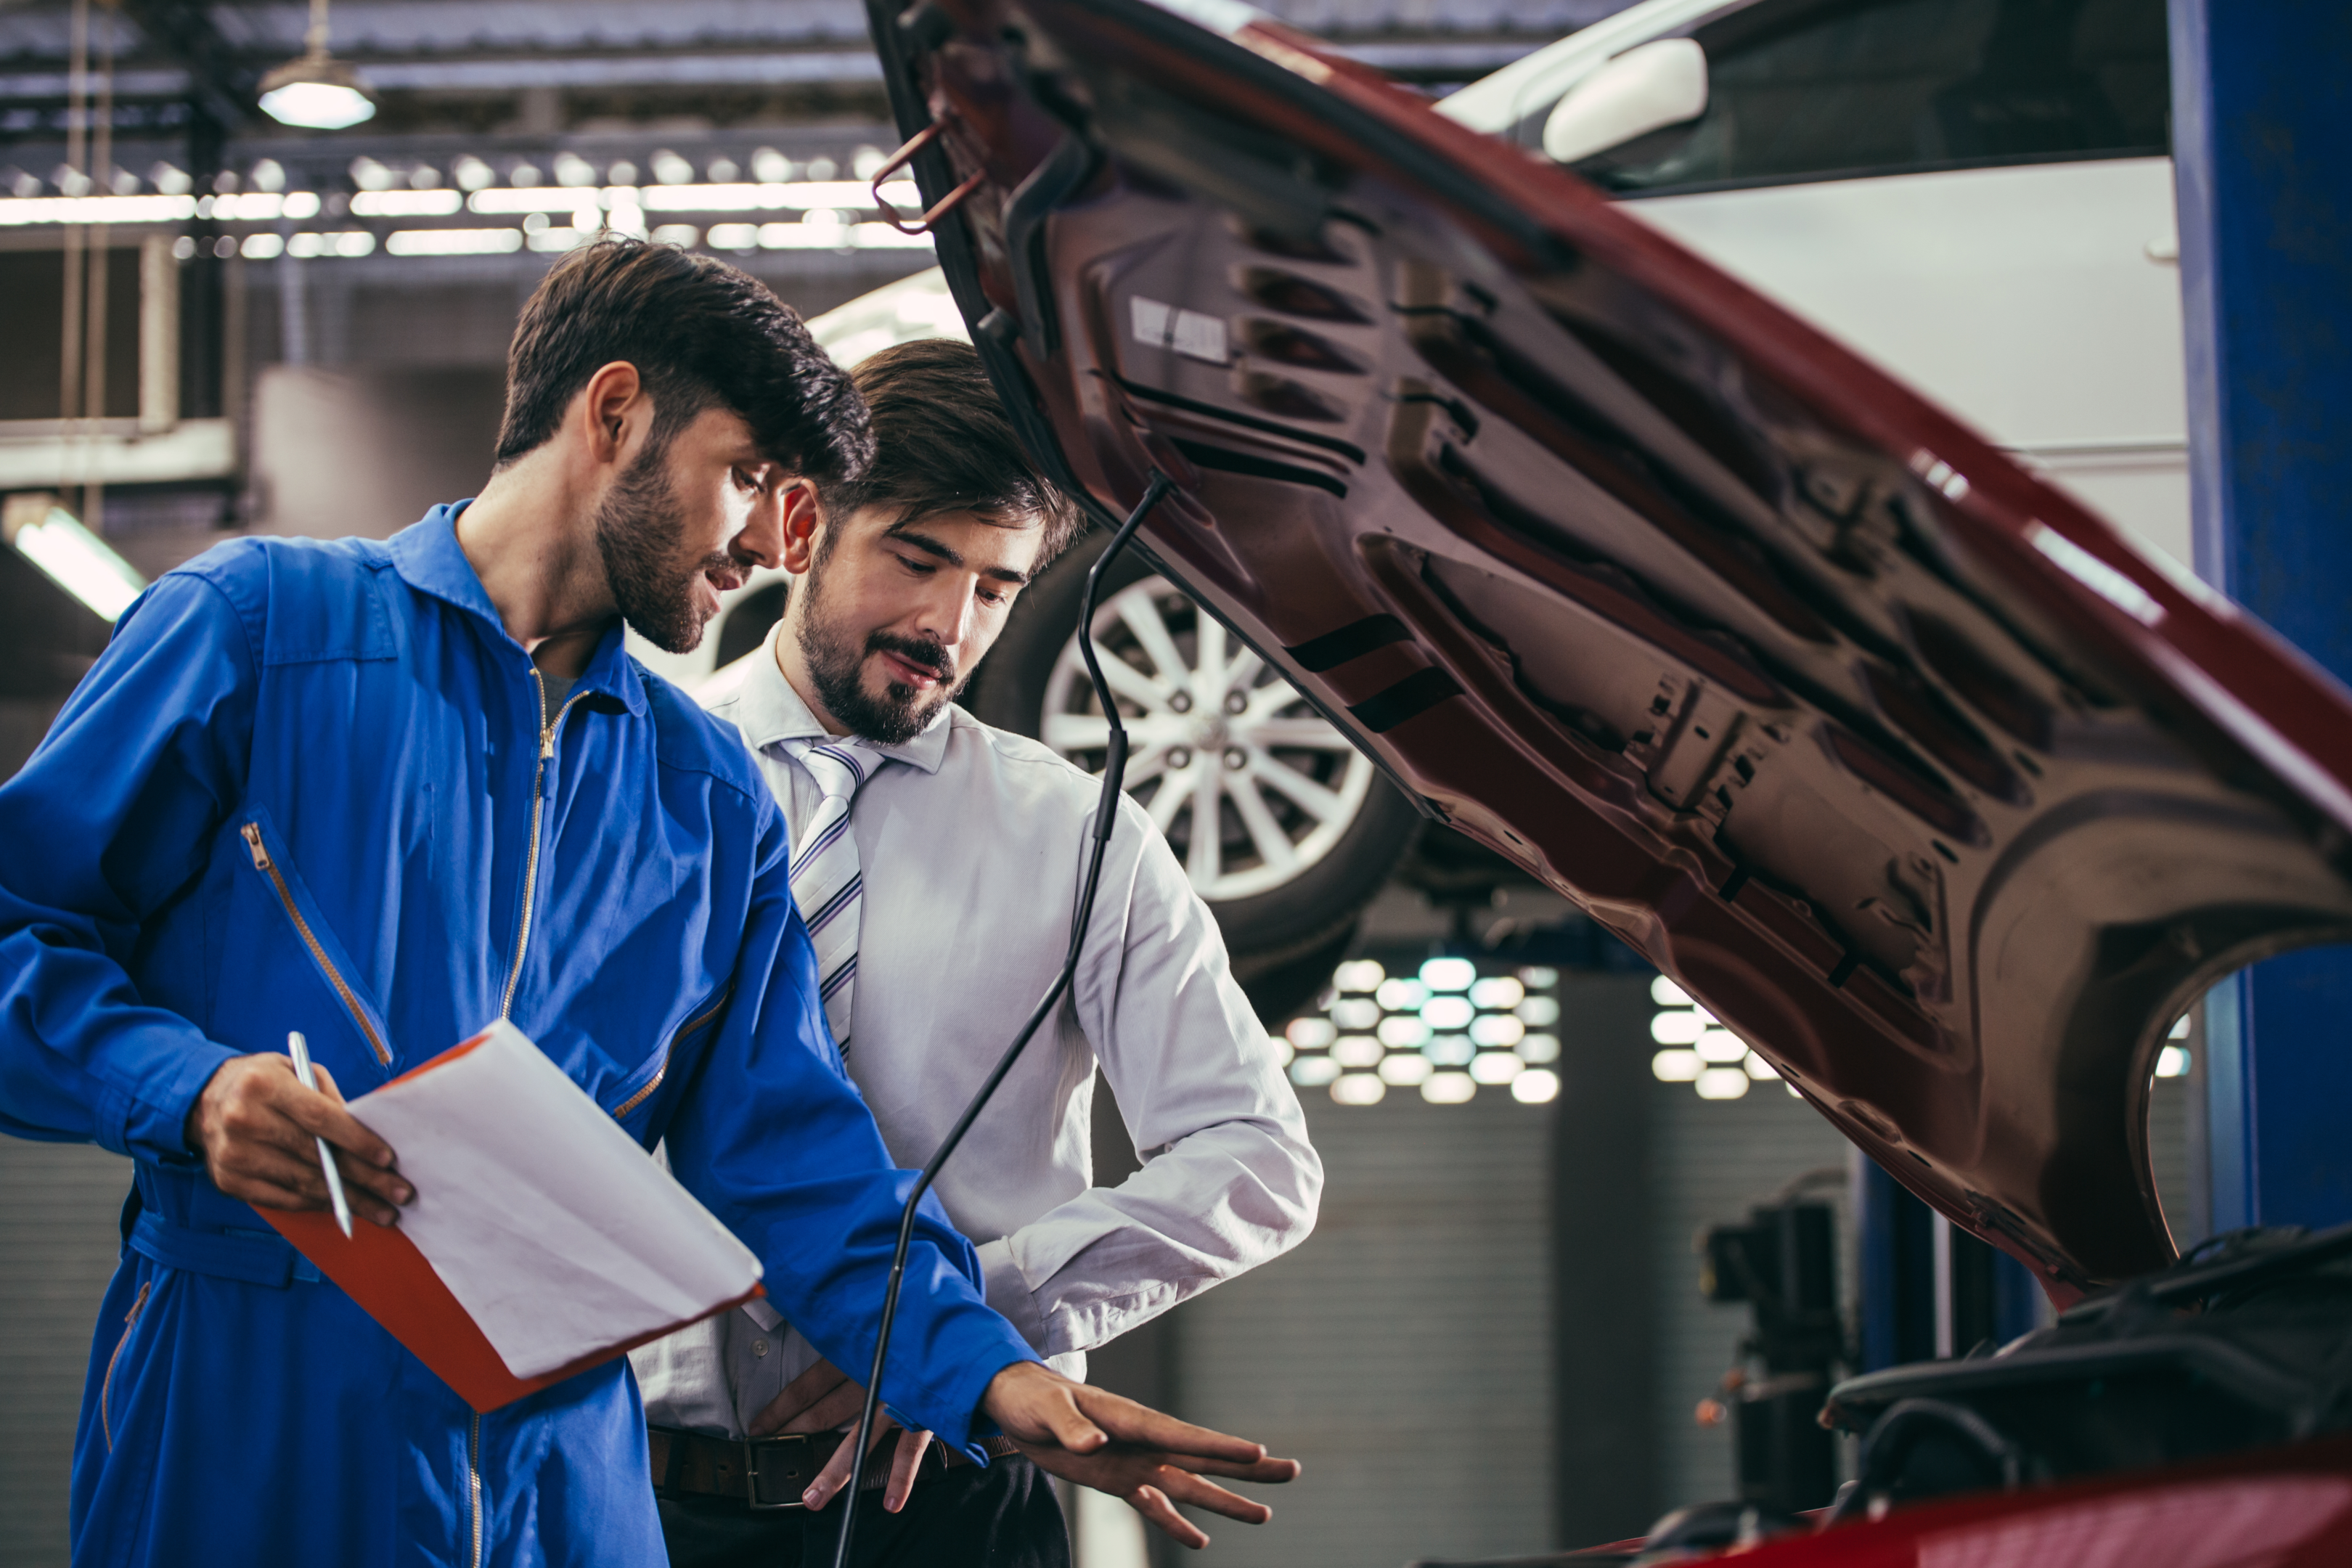 The mechanic service still has a large market in the United States